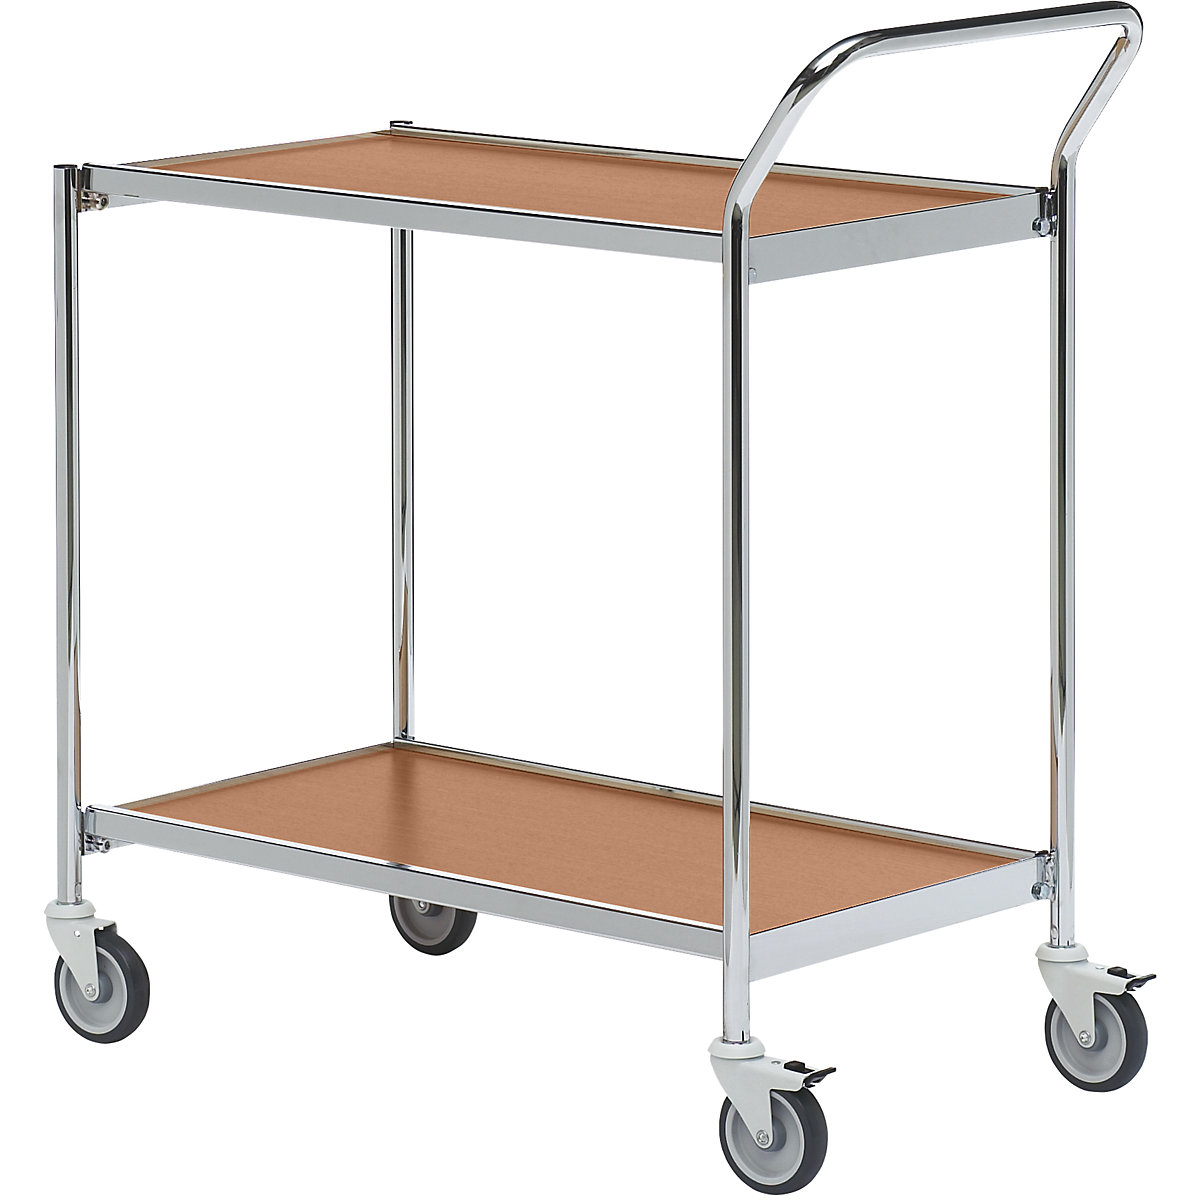 Table trolley – HelgeNyberg, 2 shelves, LxW 800 x 420 mm, chrome/beech, 5+ items-34